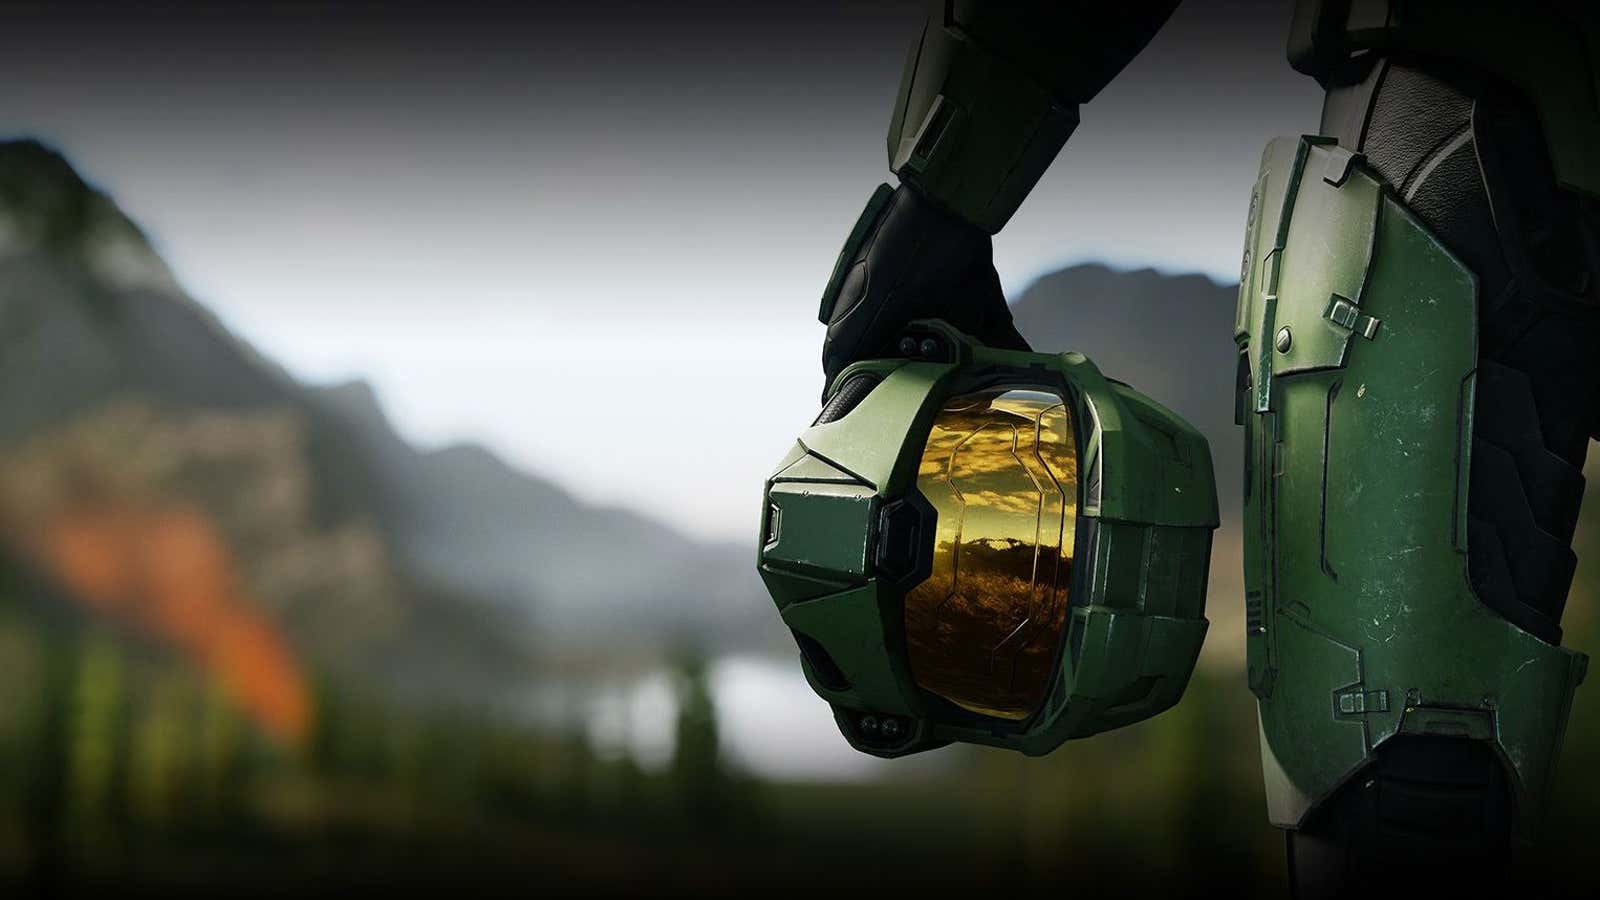 Halo TV series finally greenlit by Showtime: 'Our most ambitious ever